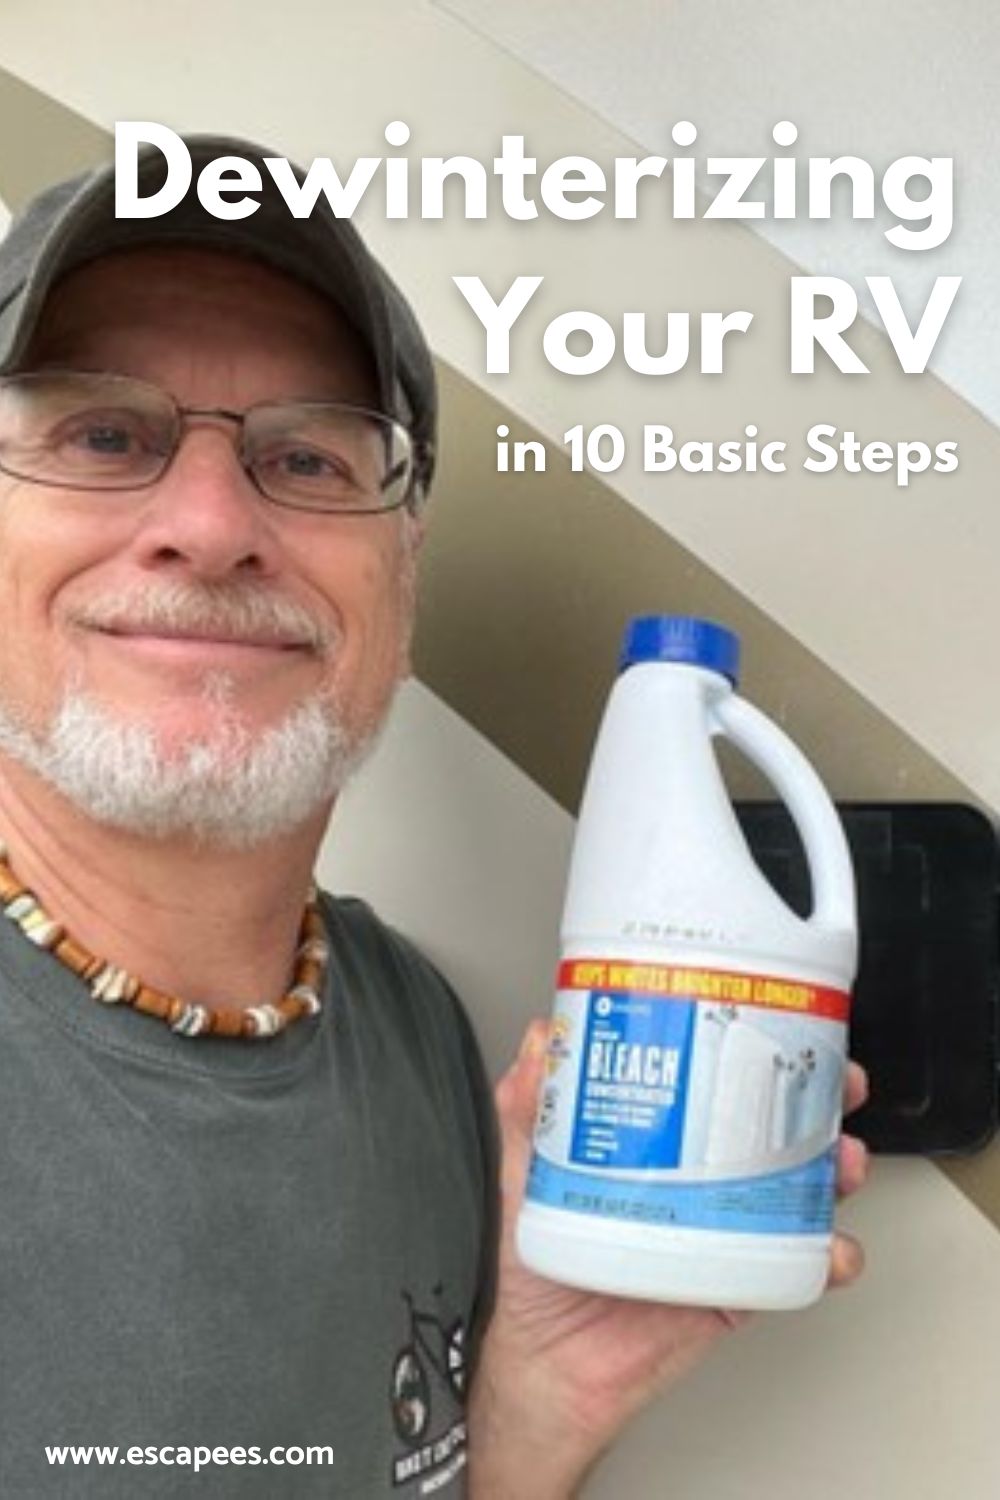 How To Dewinterize Your RV In 10 Basic Steps 73